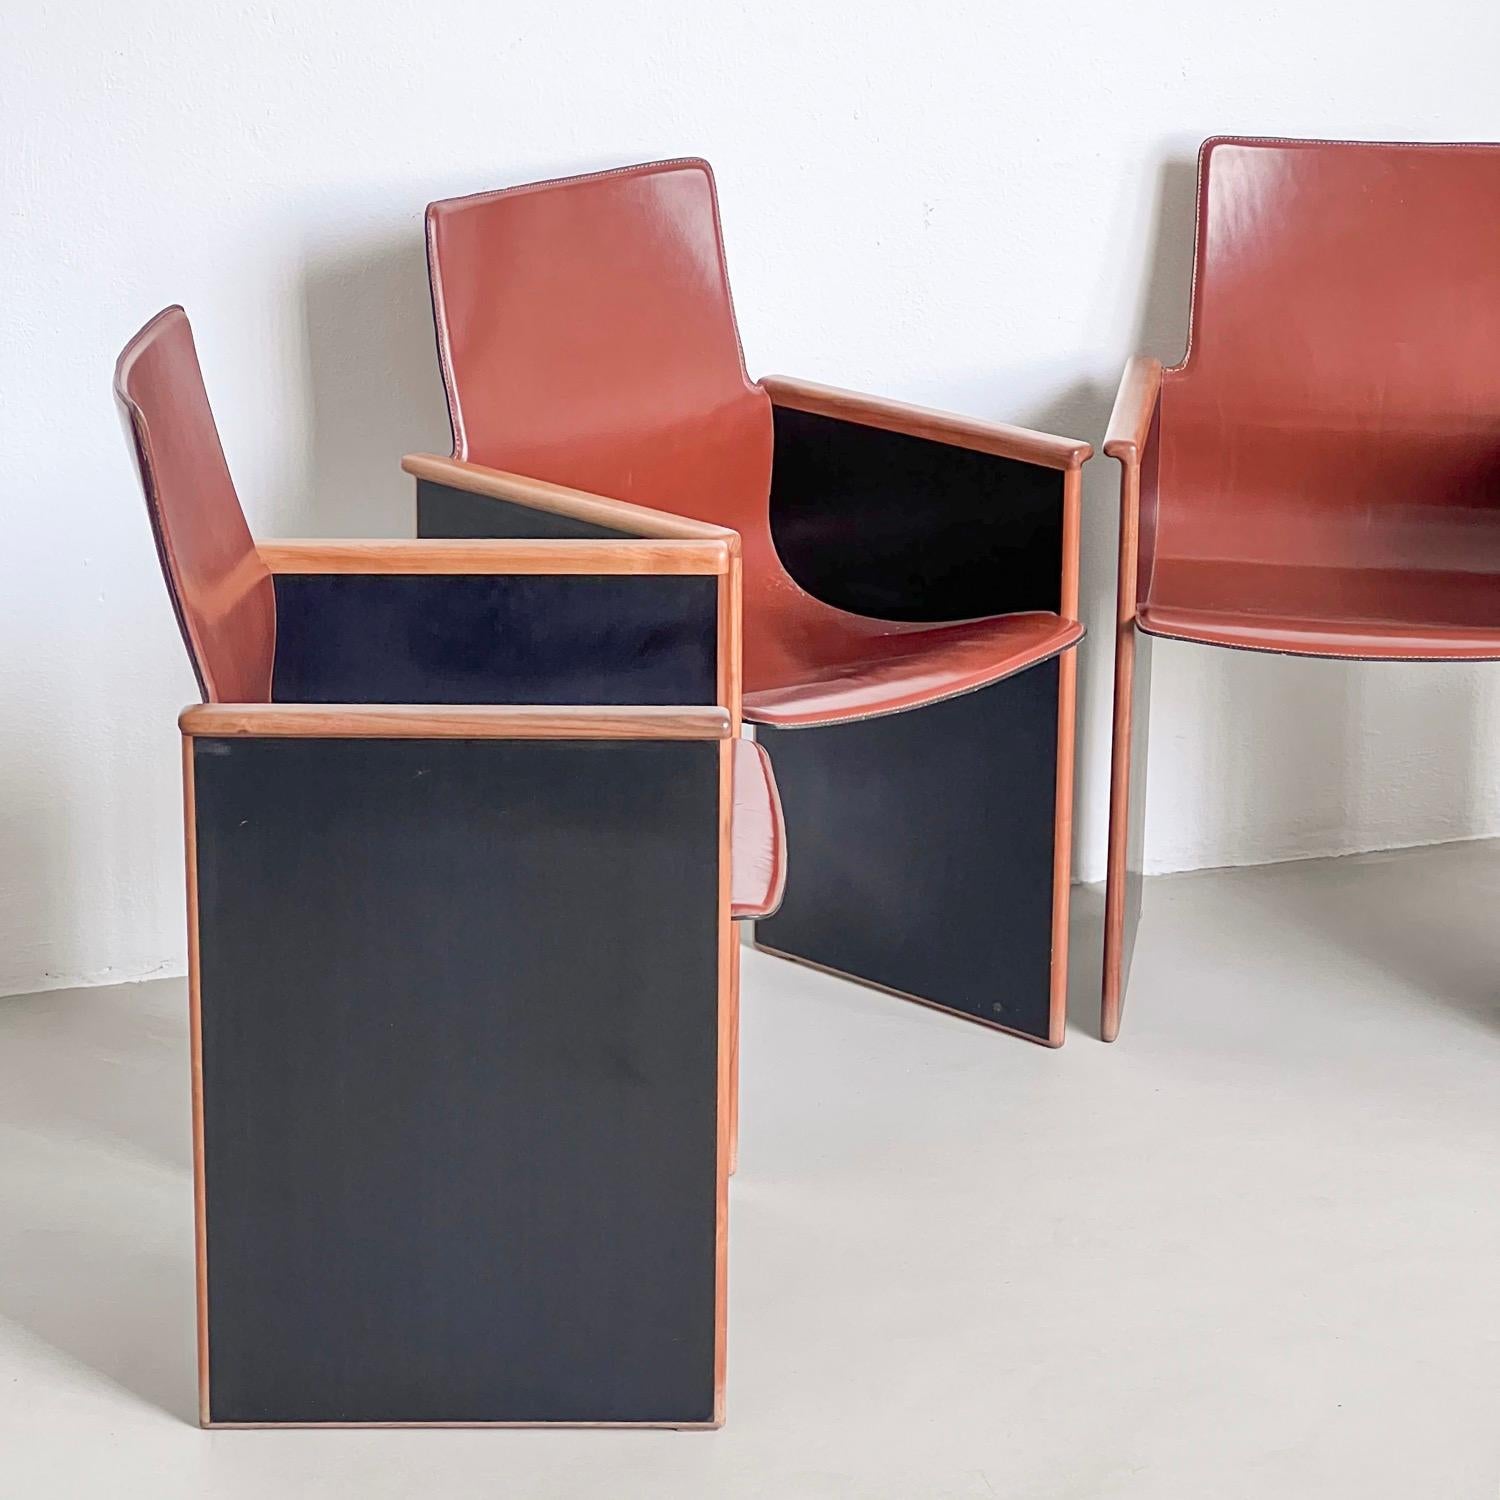 Afra and Tobia Scarpa, Stildomus Segesto dining chairs, set of four For Sale 7